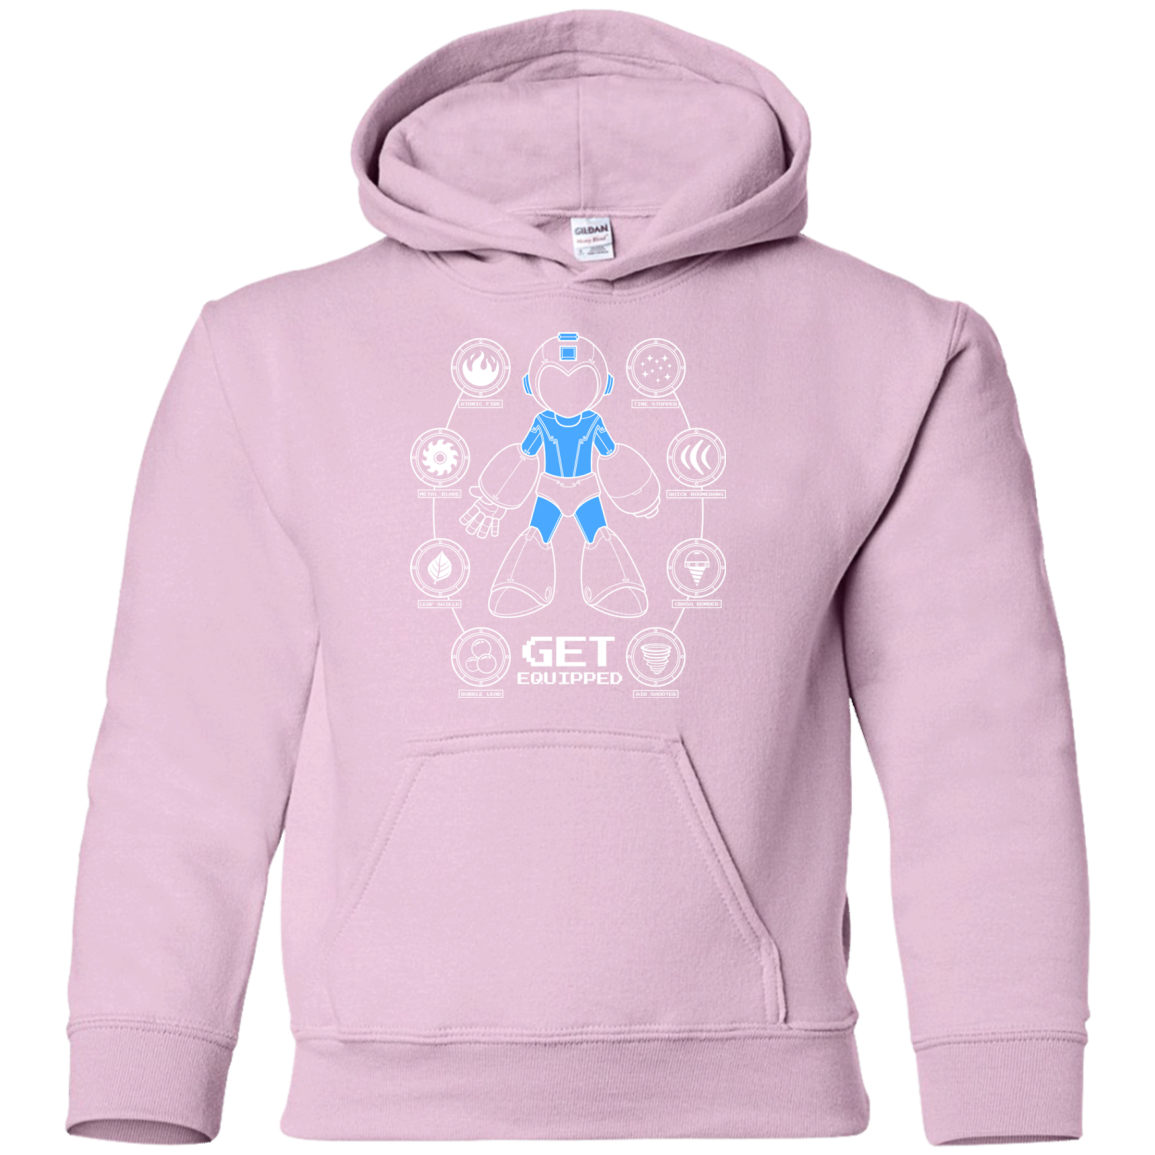 Get Equipped Youth Hoodie